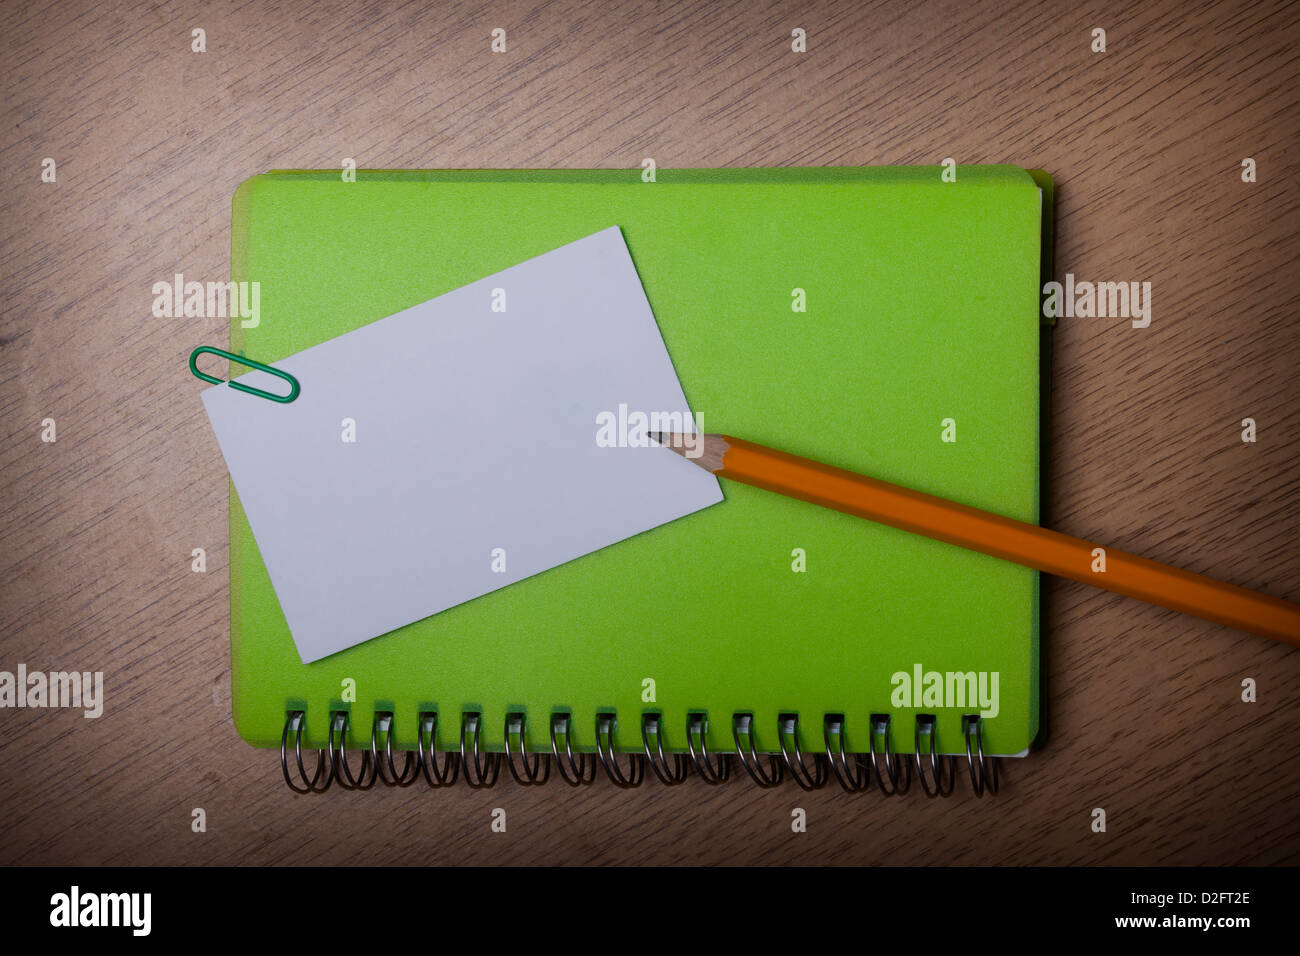 green notebook on a wooden desk Stock Photo